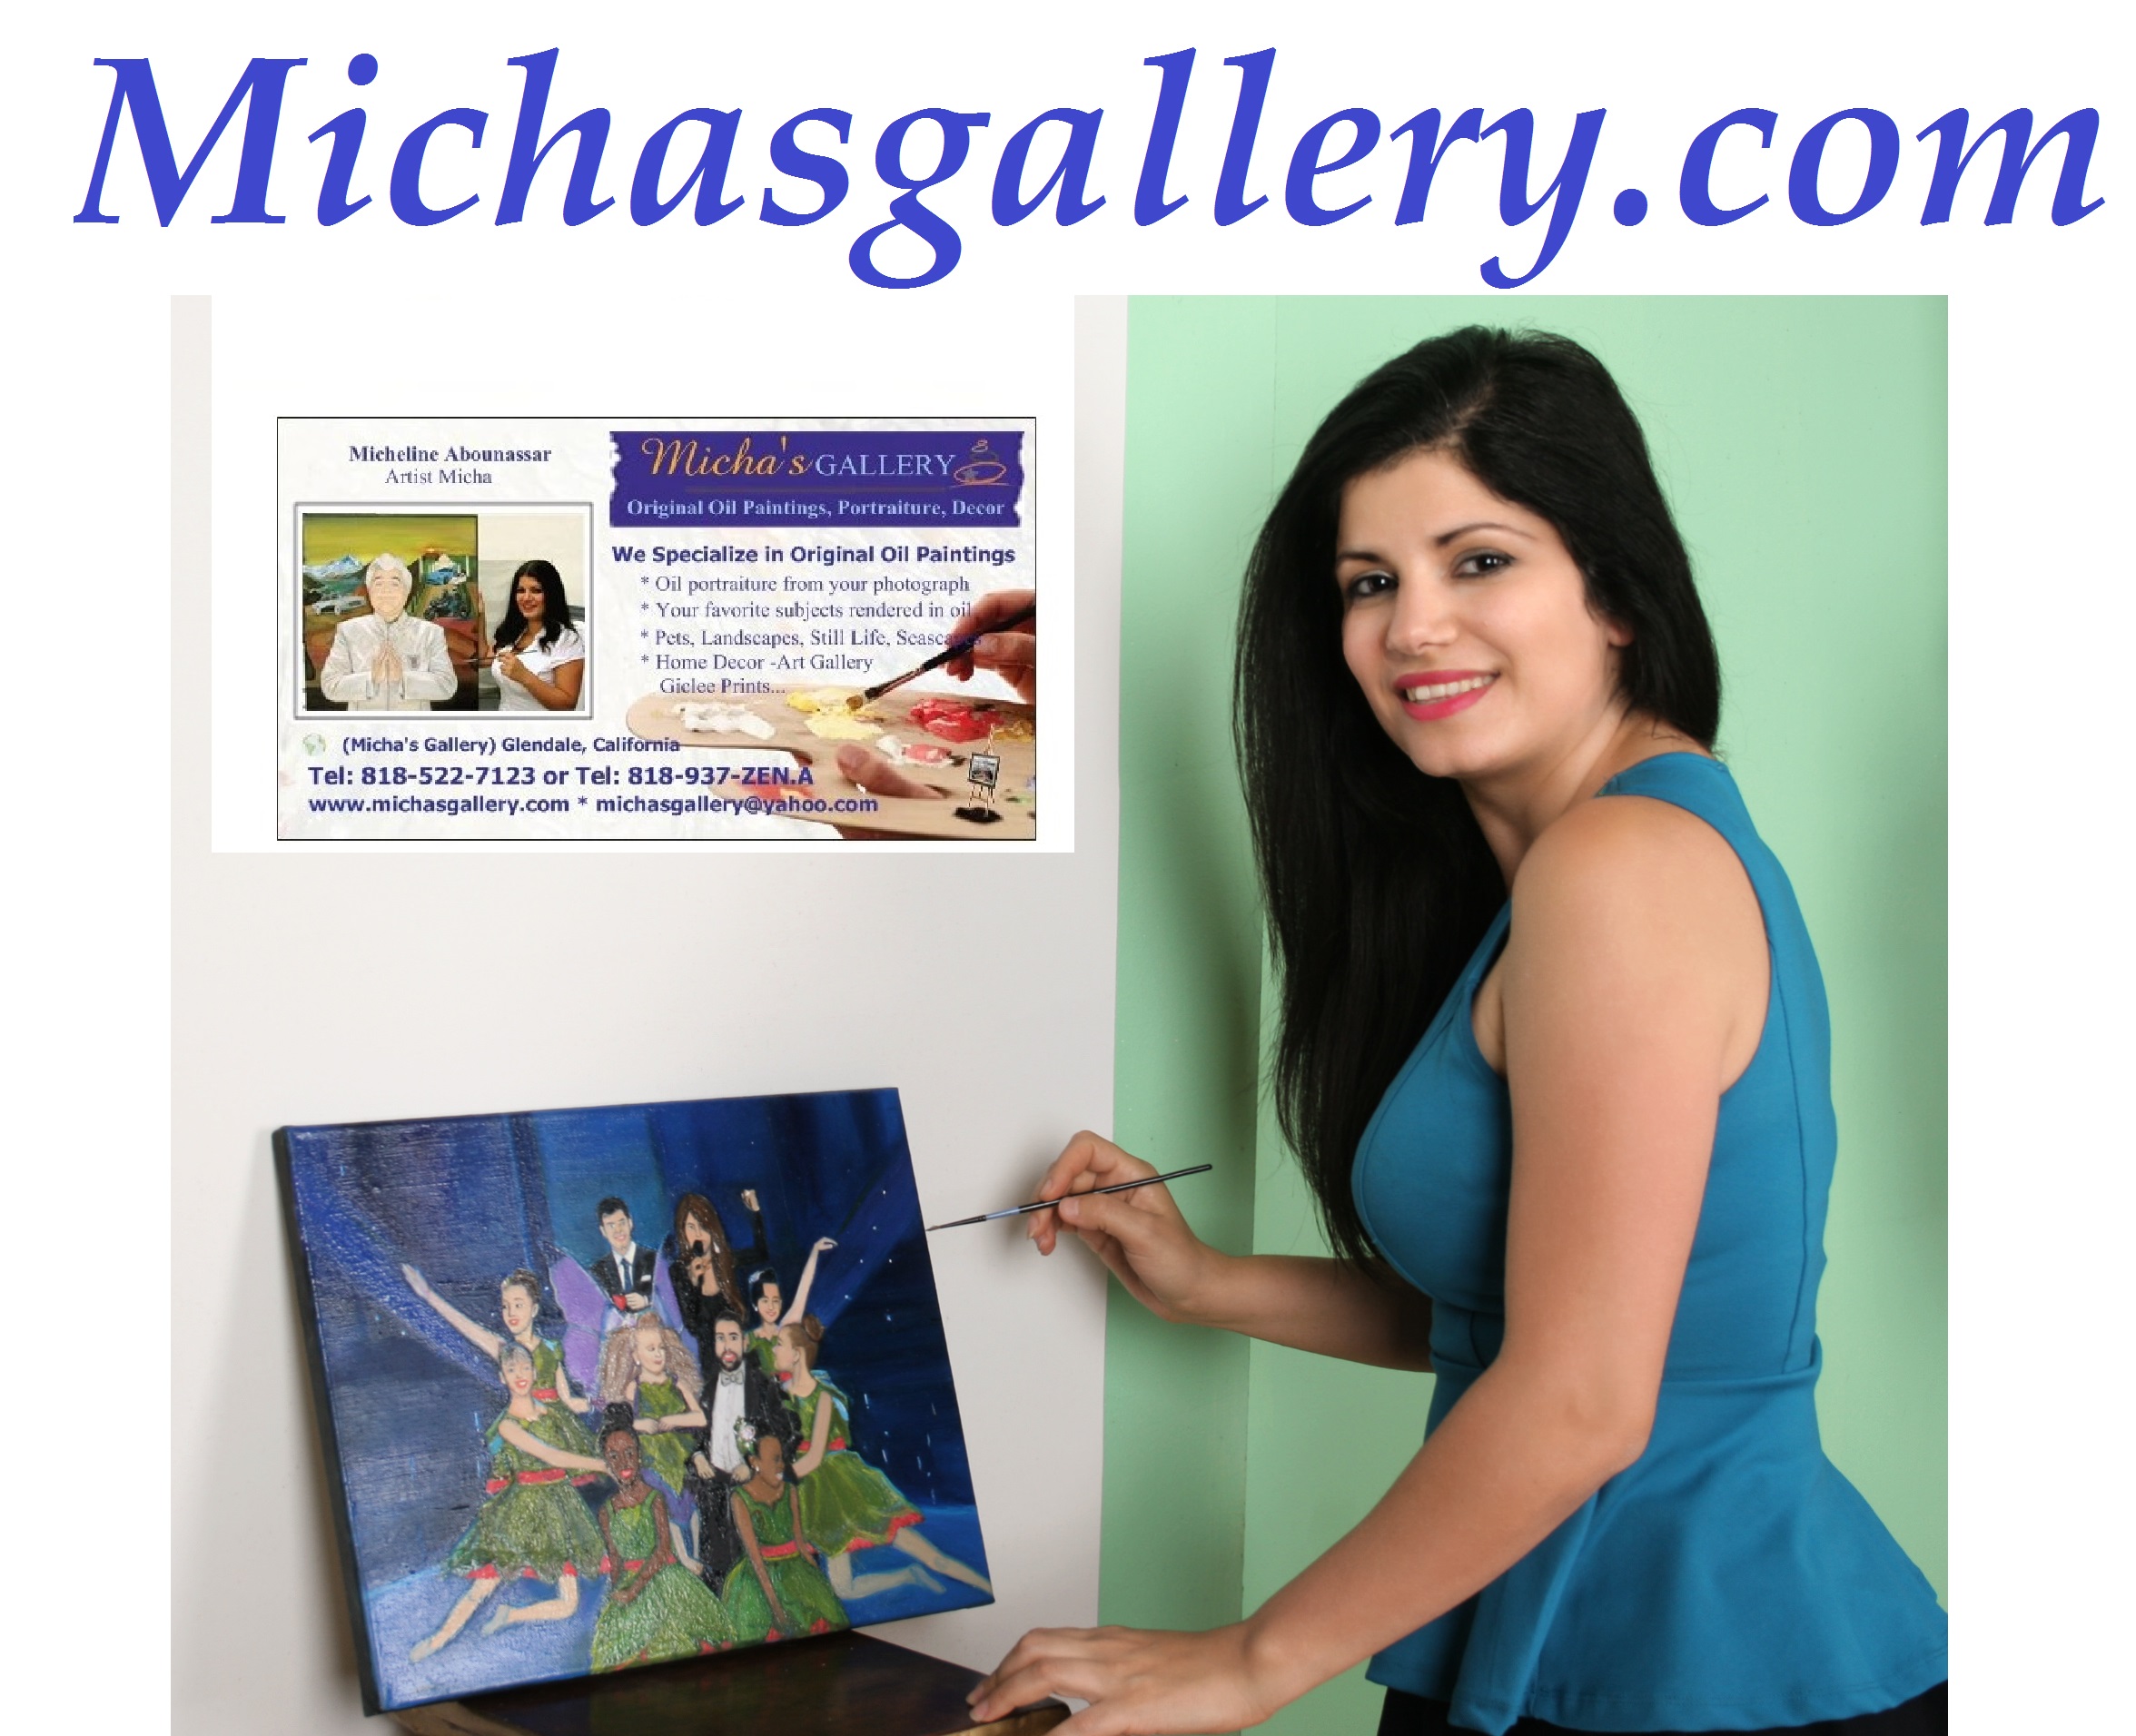 Michasgallery